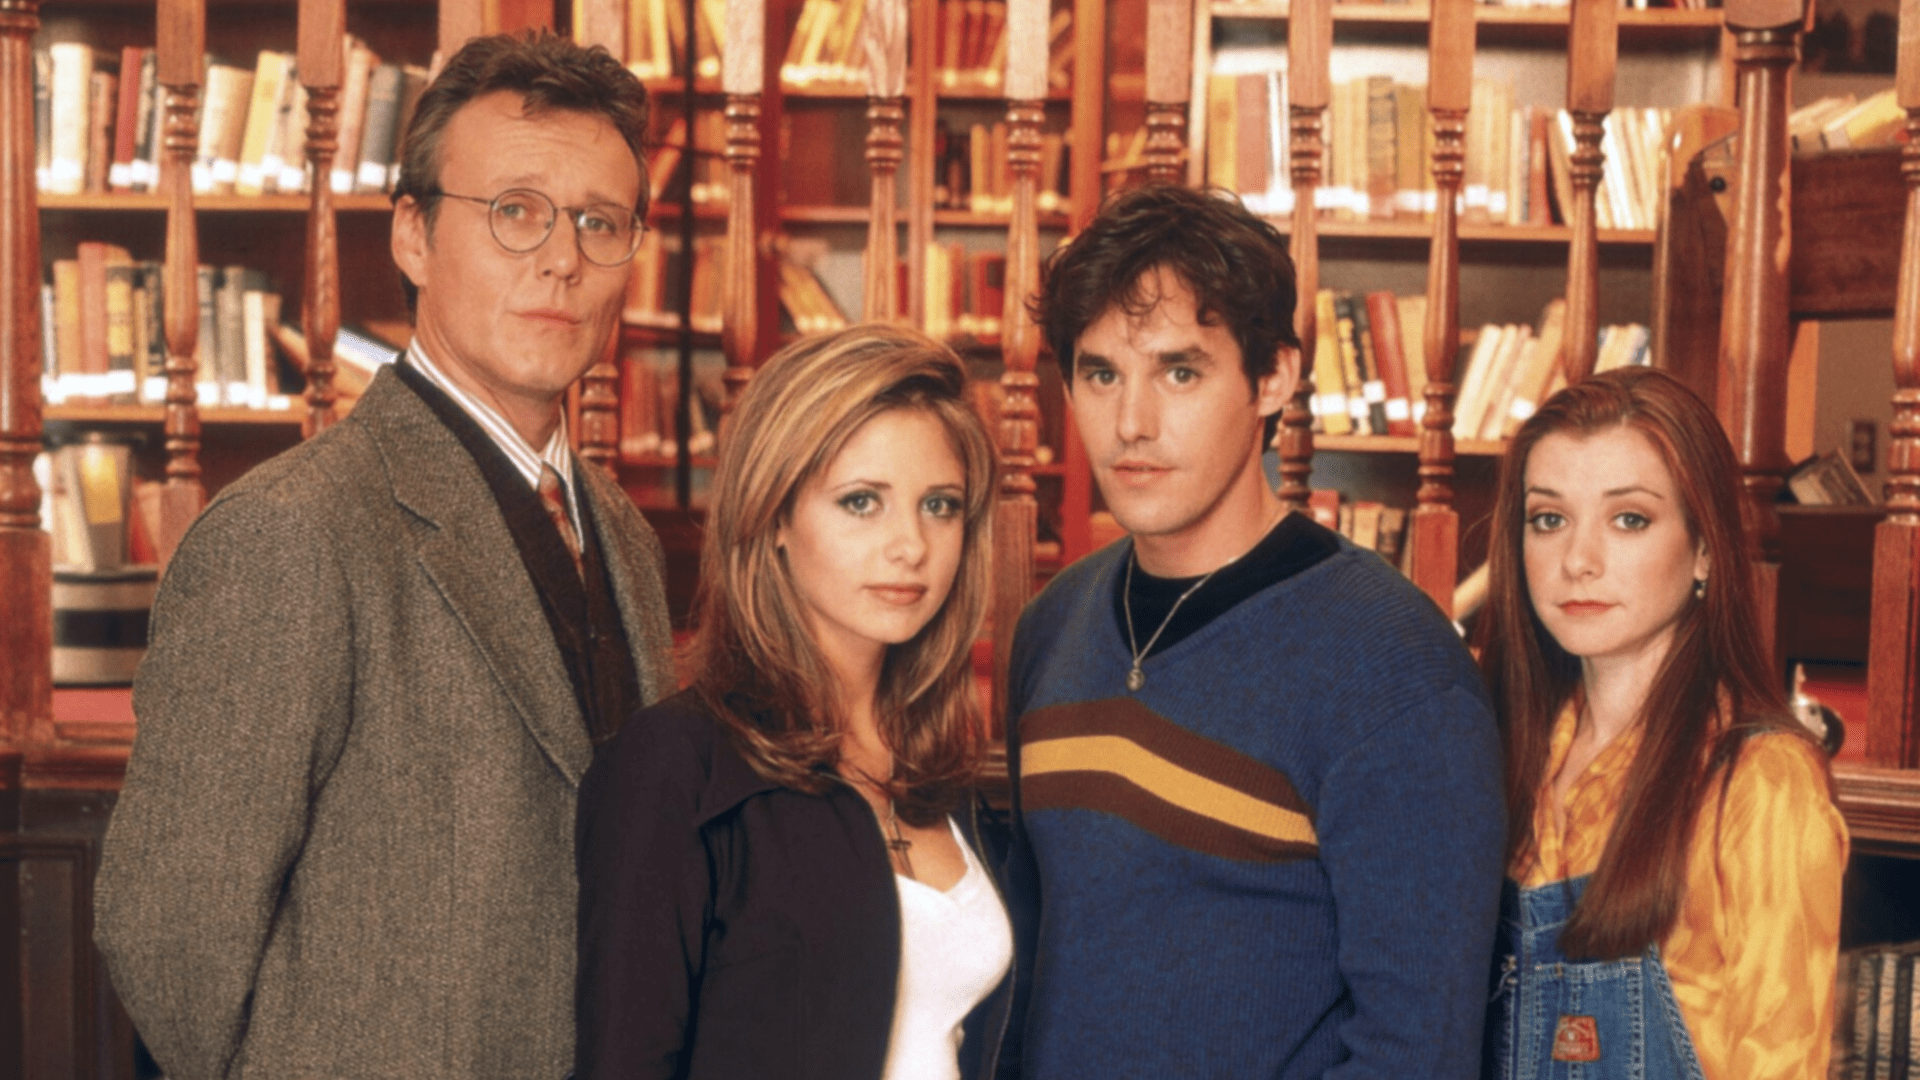 100 Buffy The Vampire Slayer Facts - The Ultimate List Of 100 Buffy The Vampire Slayer Facts